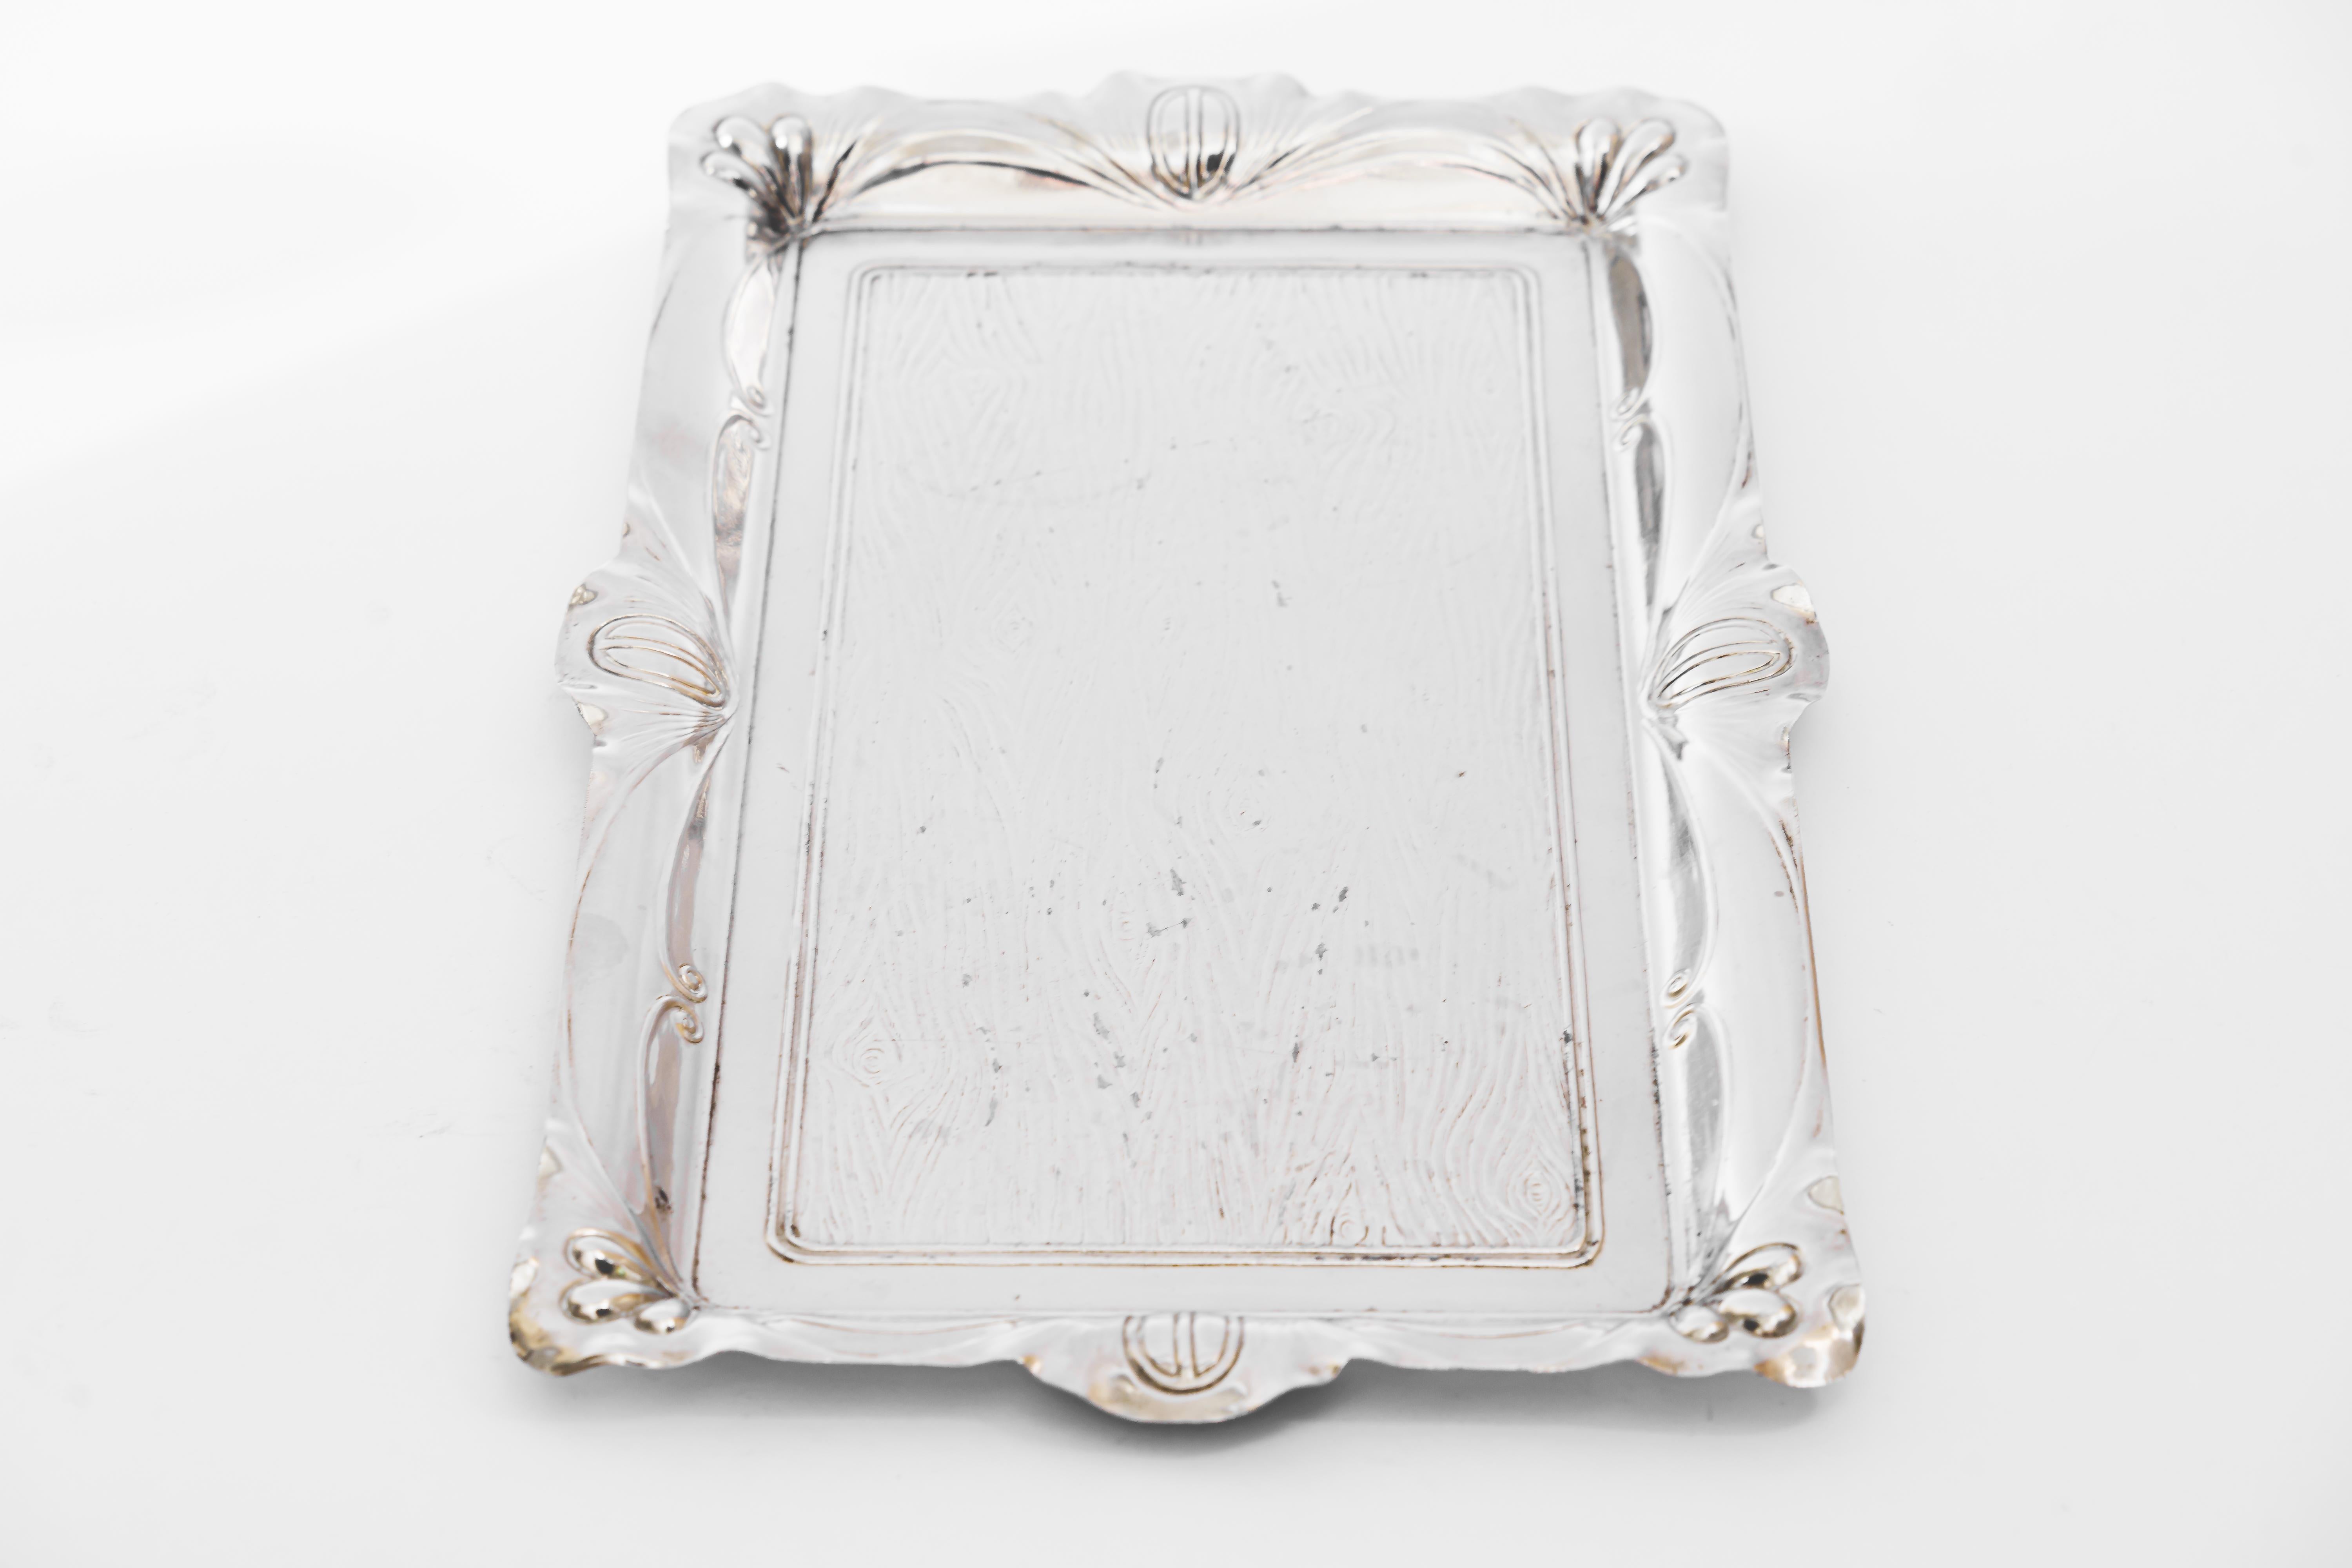 Art Deco serving plate nickel-plated vienna around 1920s.
Traces of use.
Original condition.